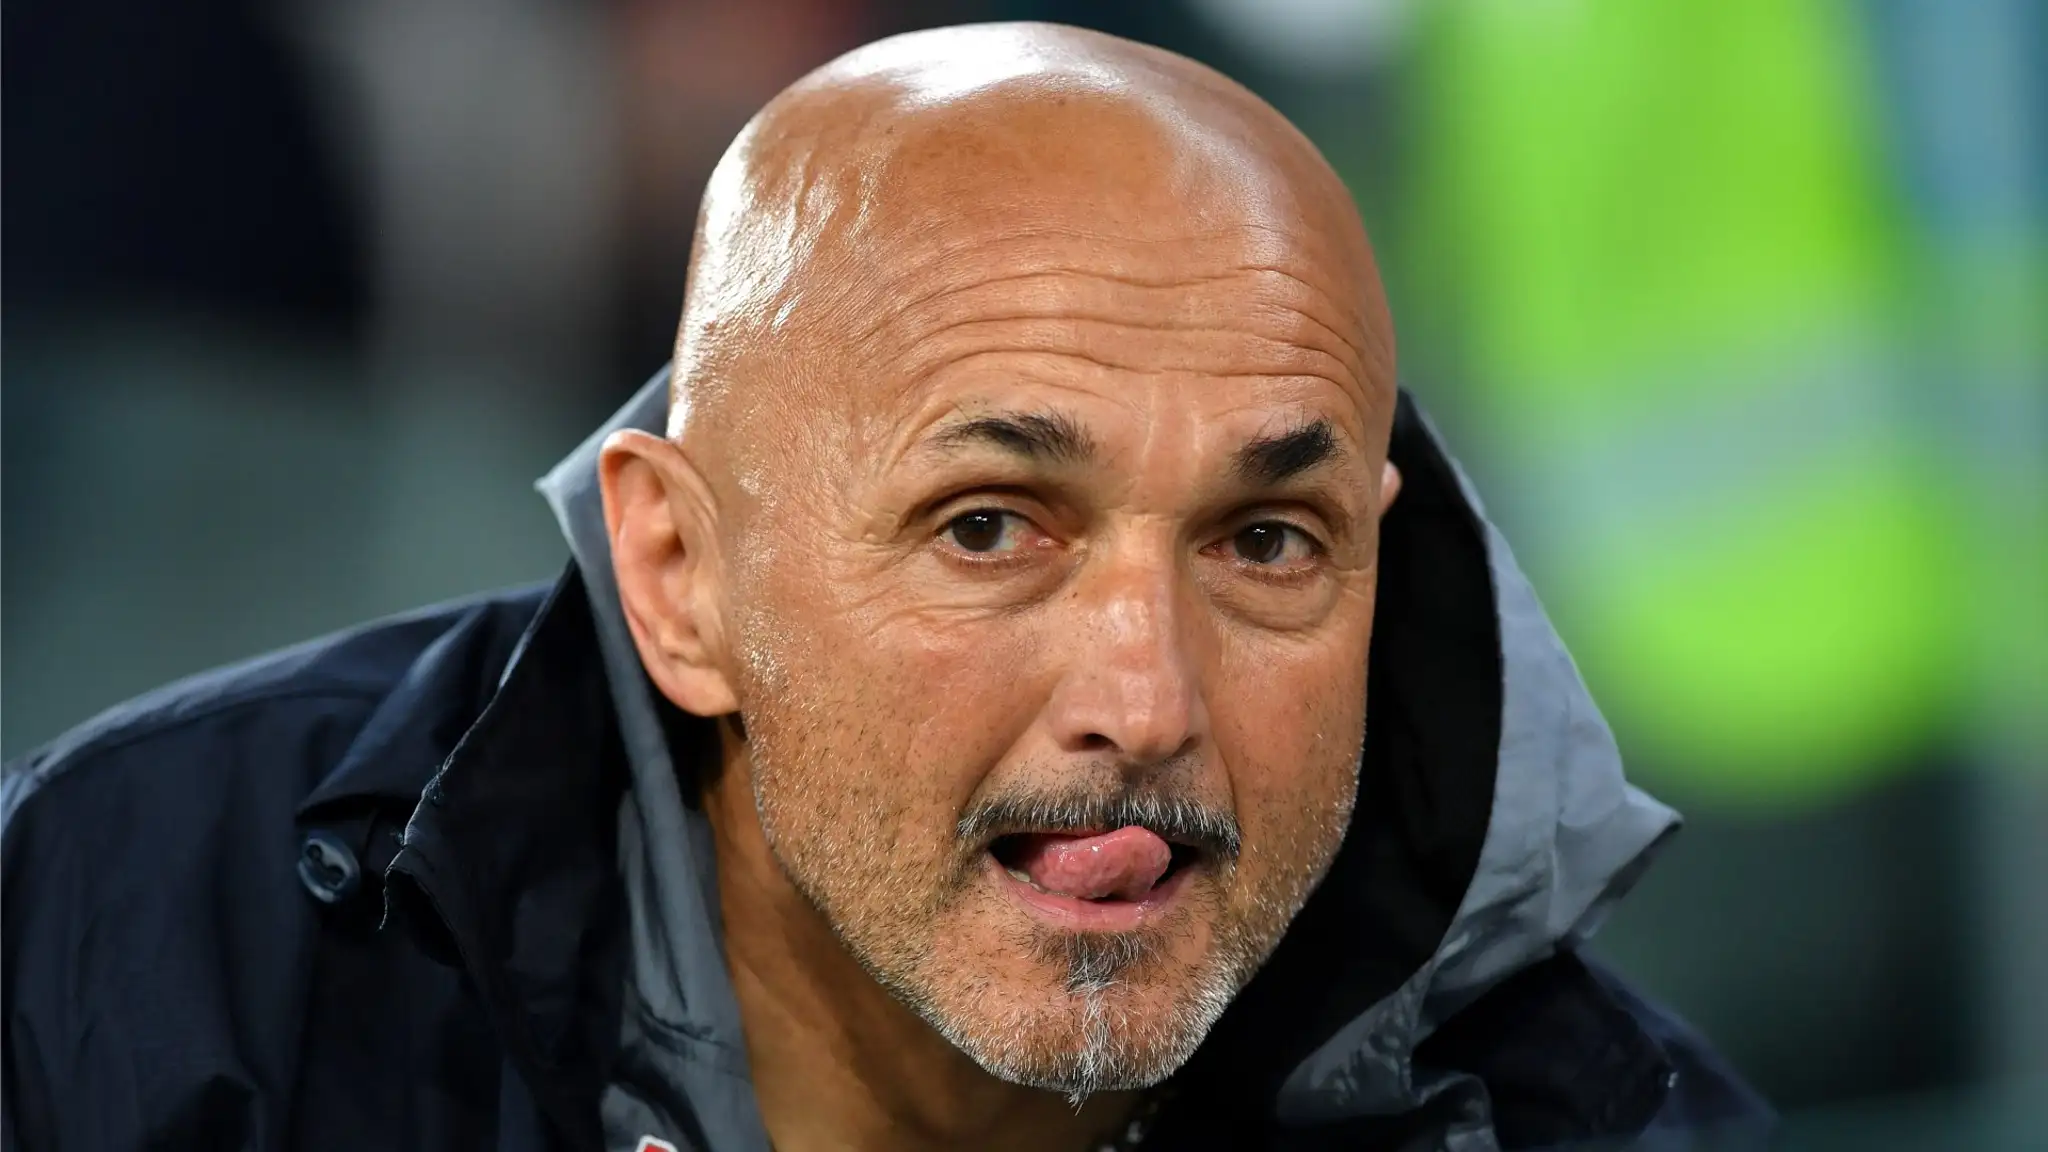 Napoli to replace Luciano Spalletti with Rafa Benitez? Chaos at the new Serie A champions